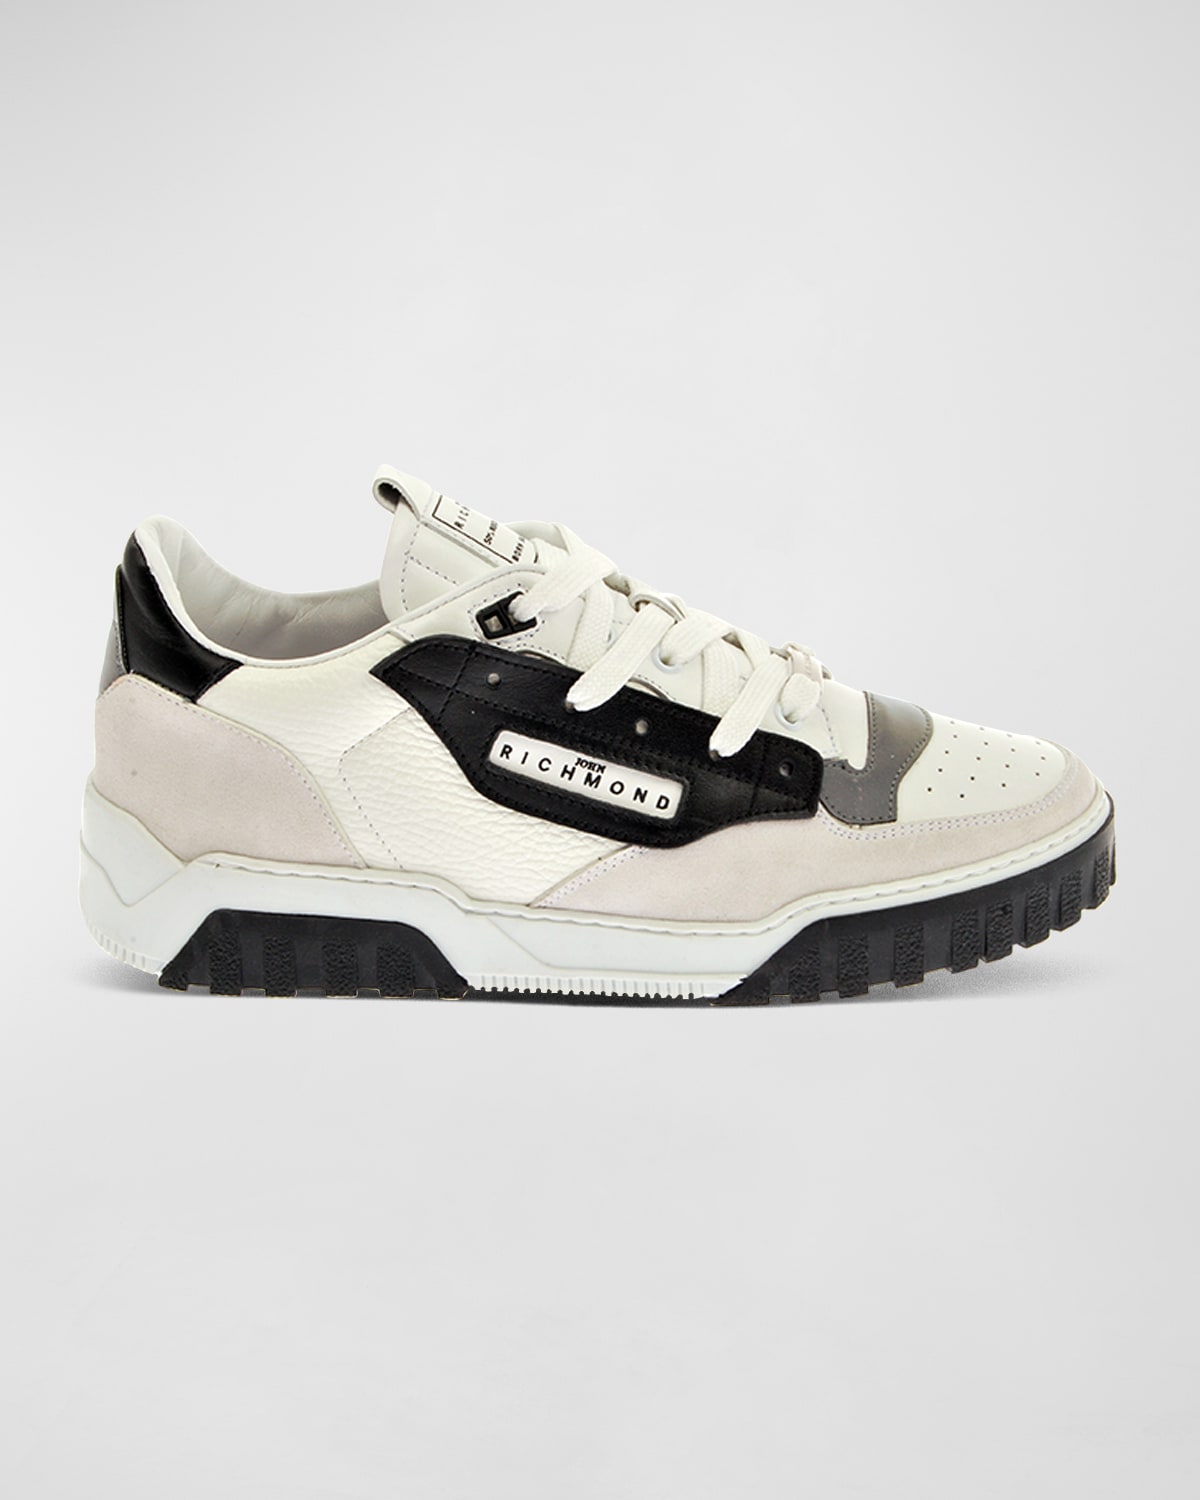 John Richmond Men's Leather-suede Low-top Trainers In White/black